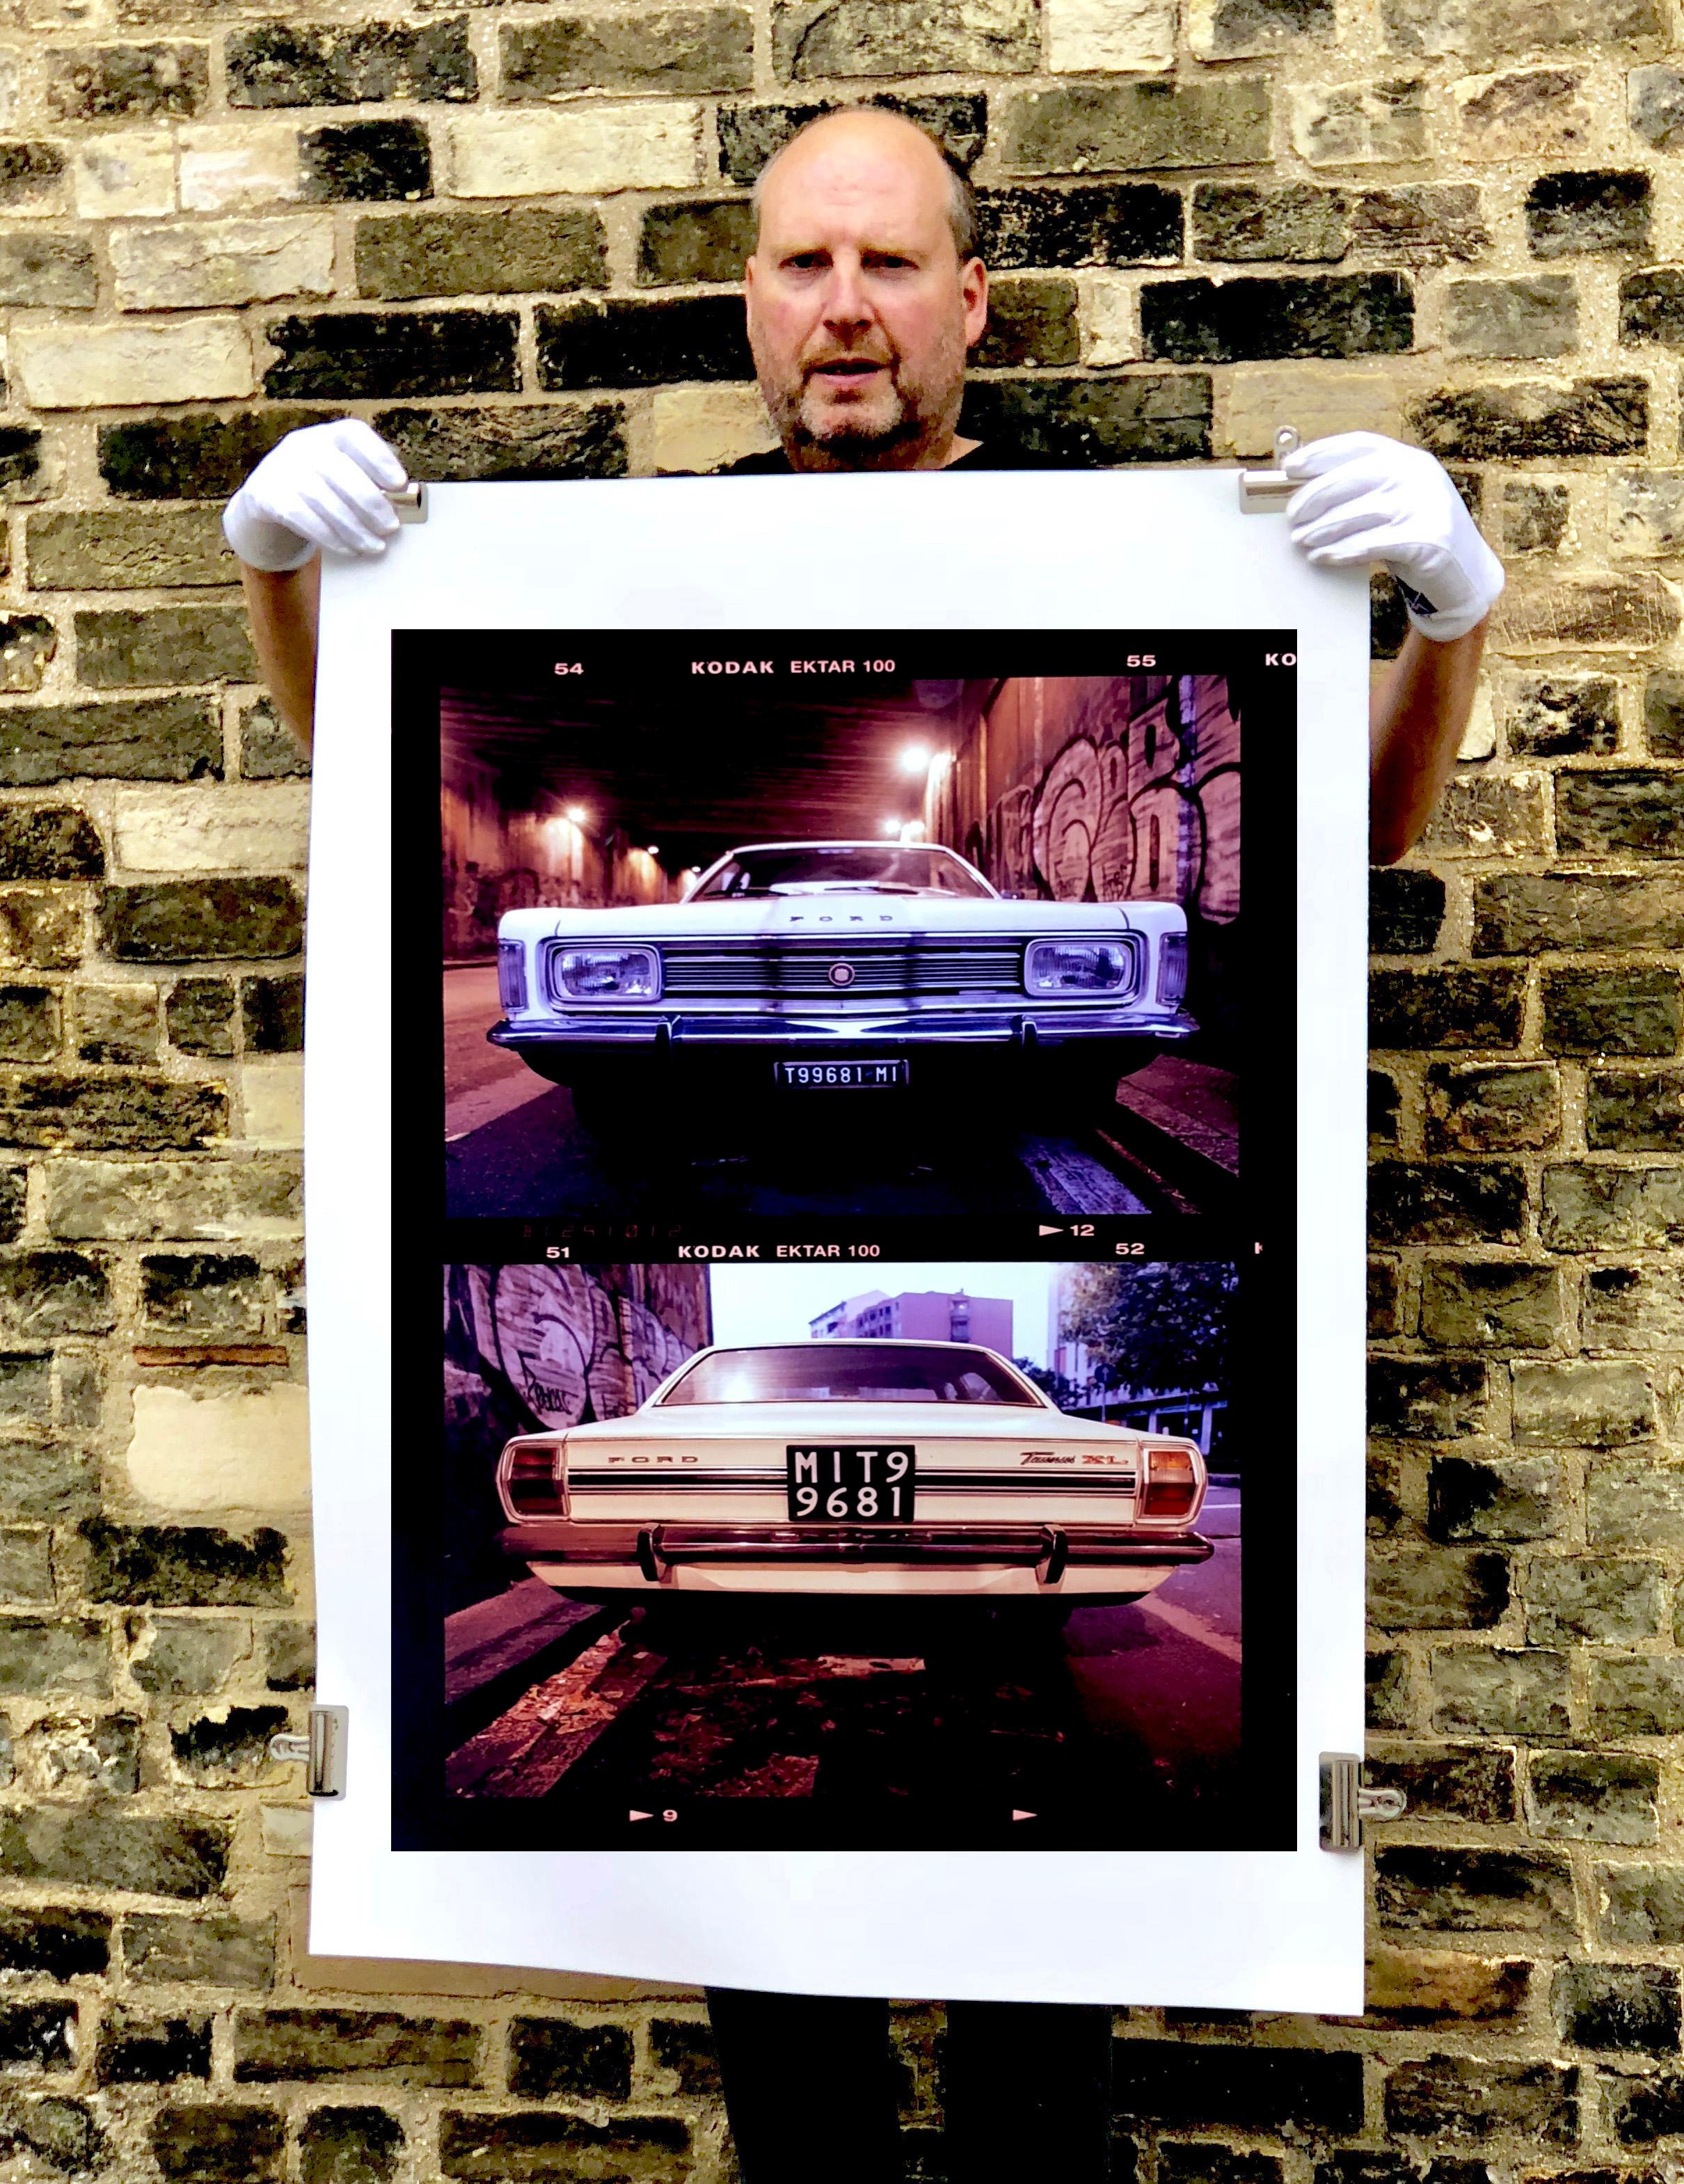 Ford Taurus, Turro, Milan - Vintage car, color photography - Print by Richard Heeps